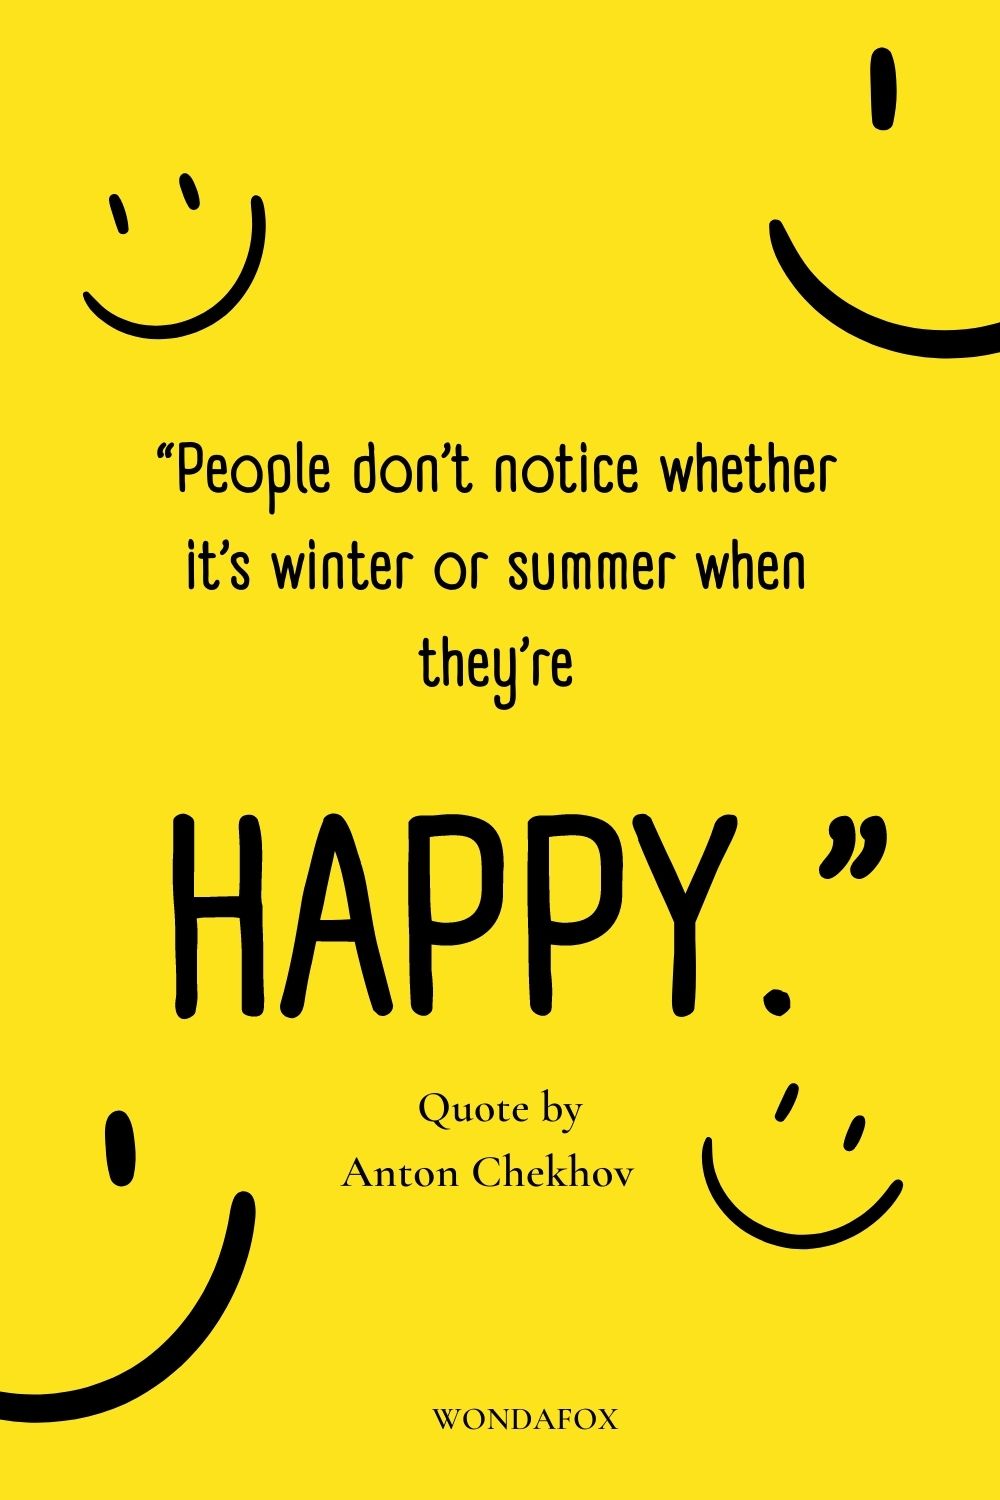 “People don’t notice whether it’s winter or summer when they’re happy.” 
Anton Chekhov